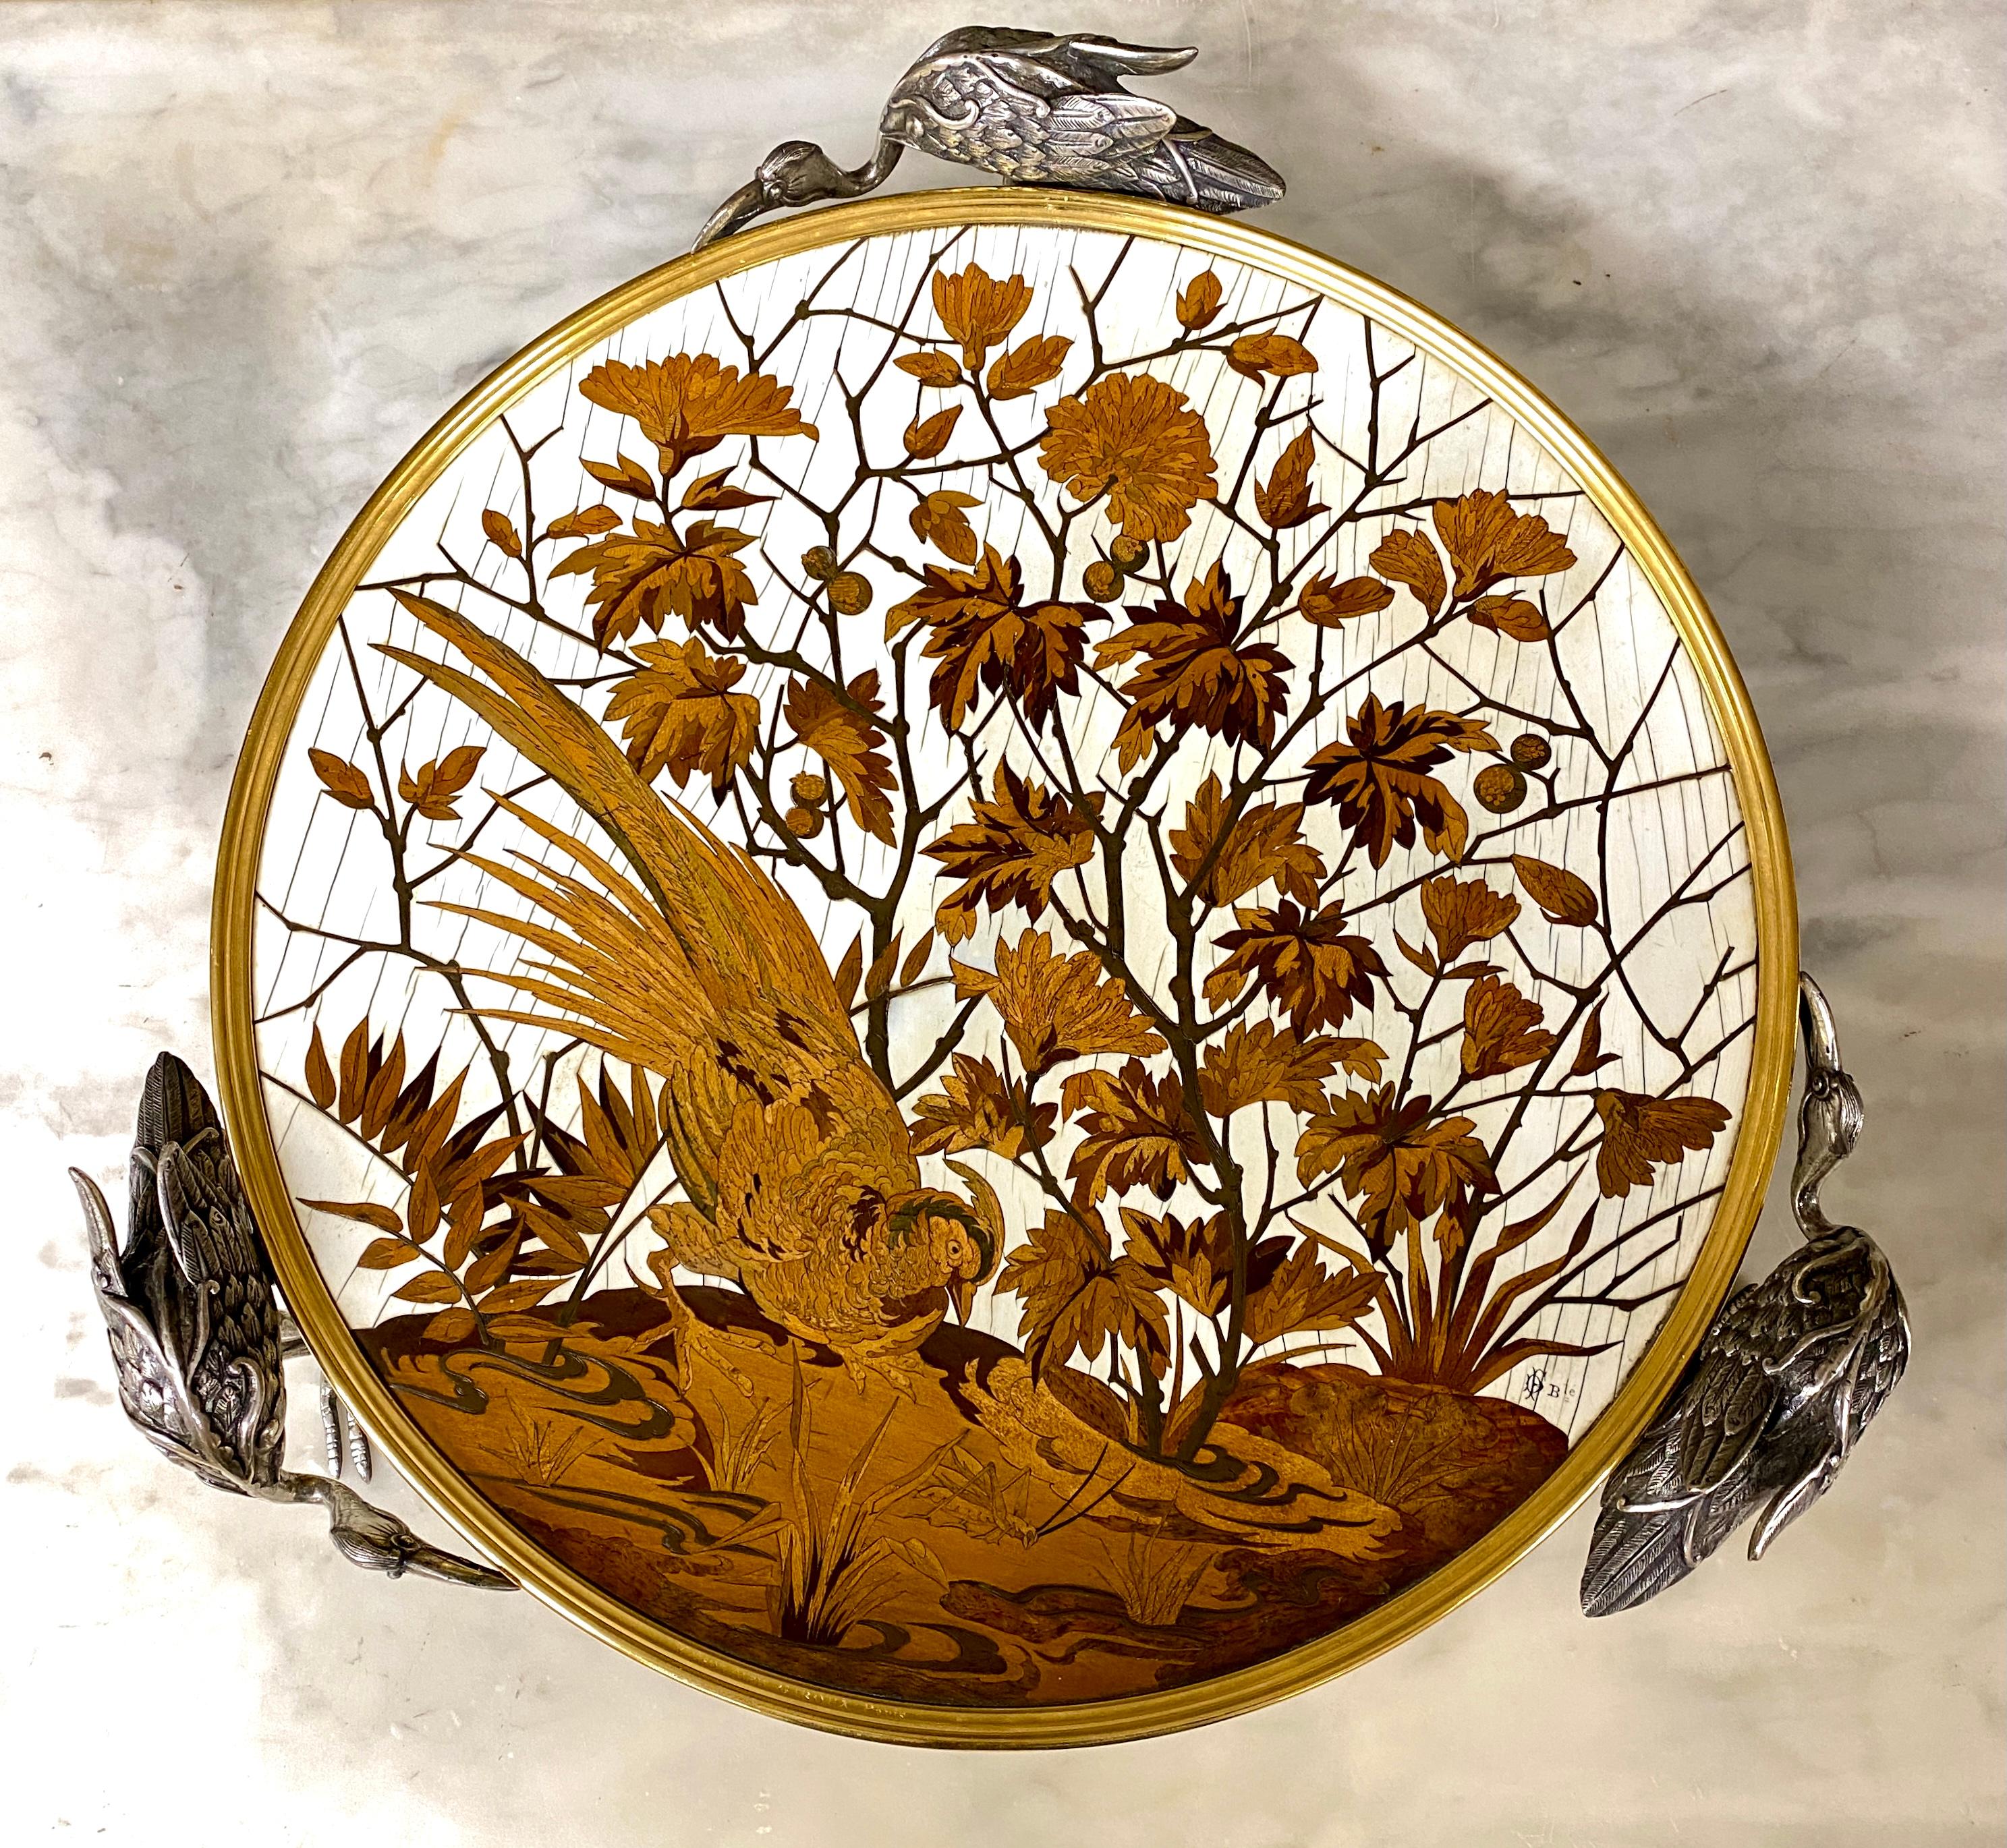 Alphonse Giroux and Duvinage, Japanese Bowl with Storks in Marquetry Cloisonné For Sale 2